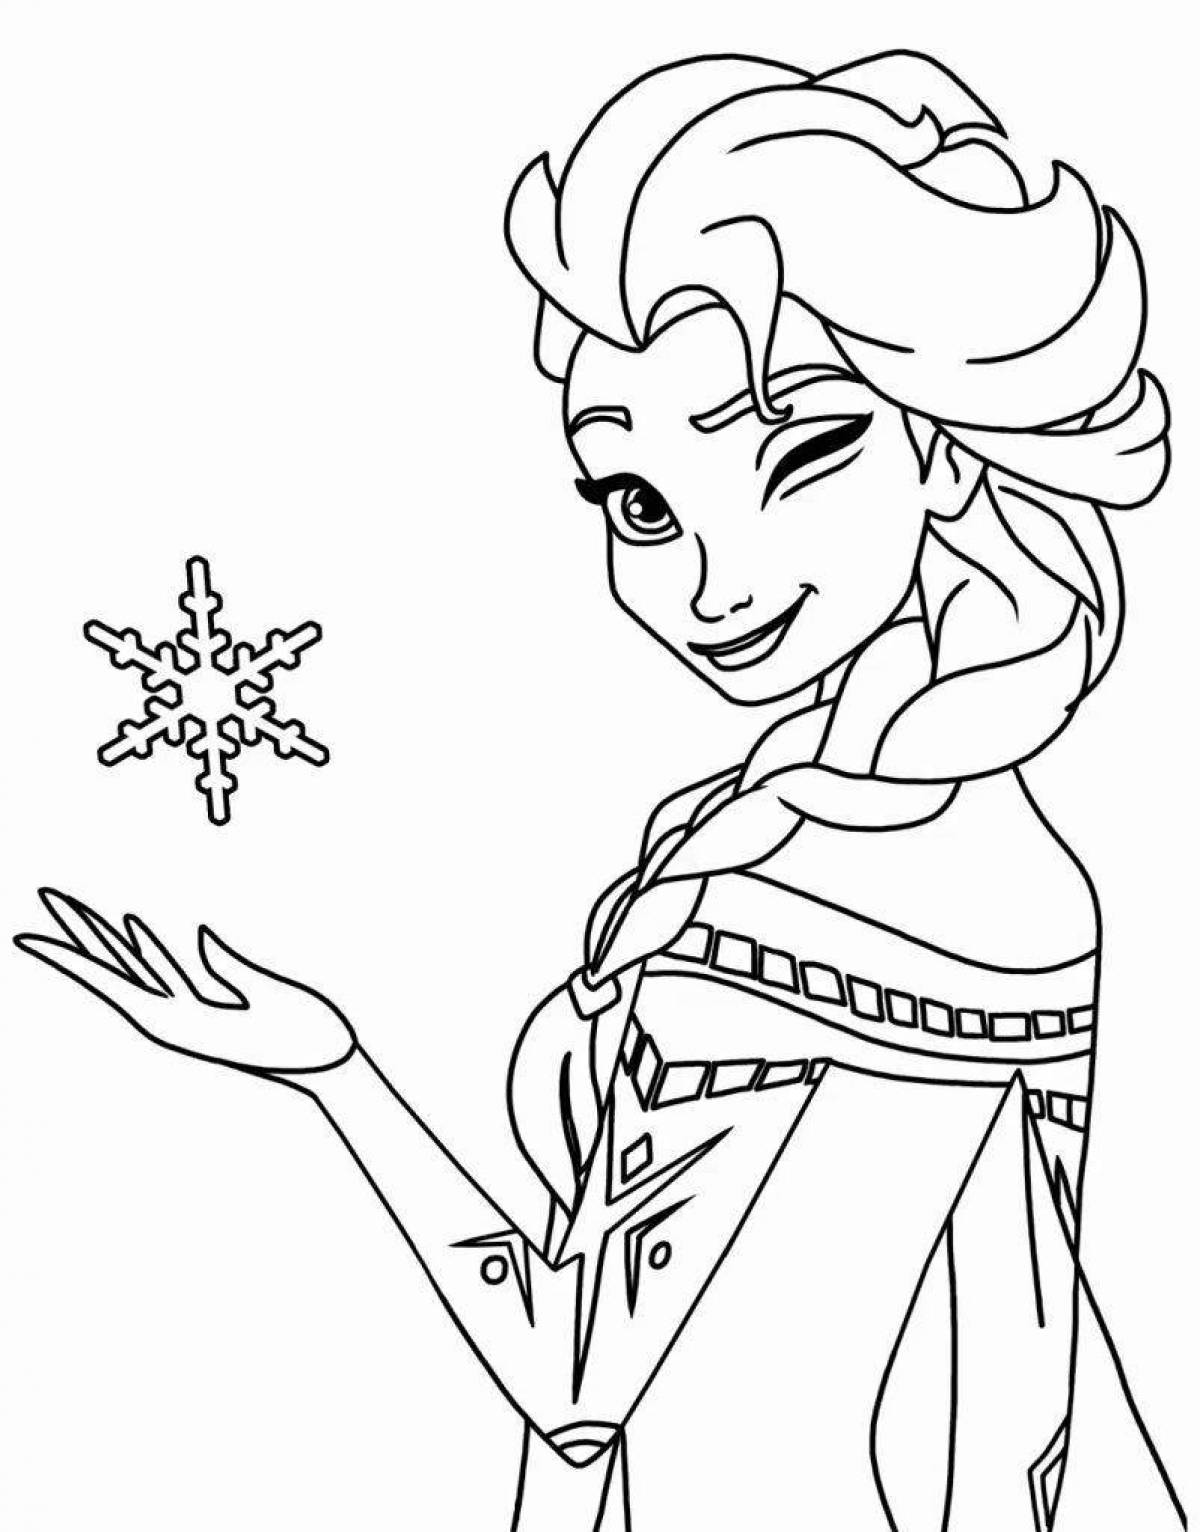 Cold heart glitter coloring game